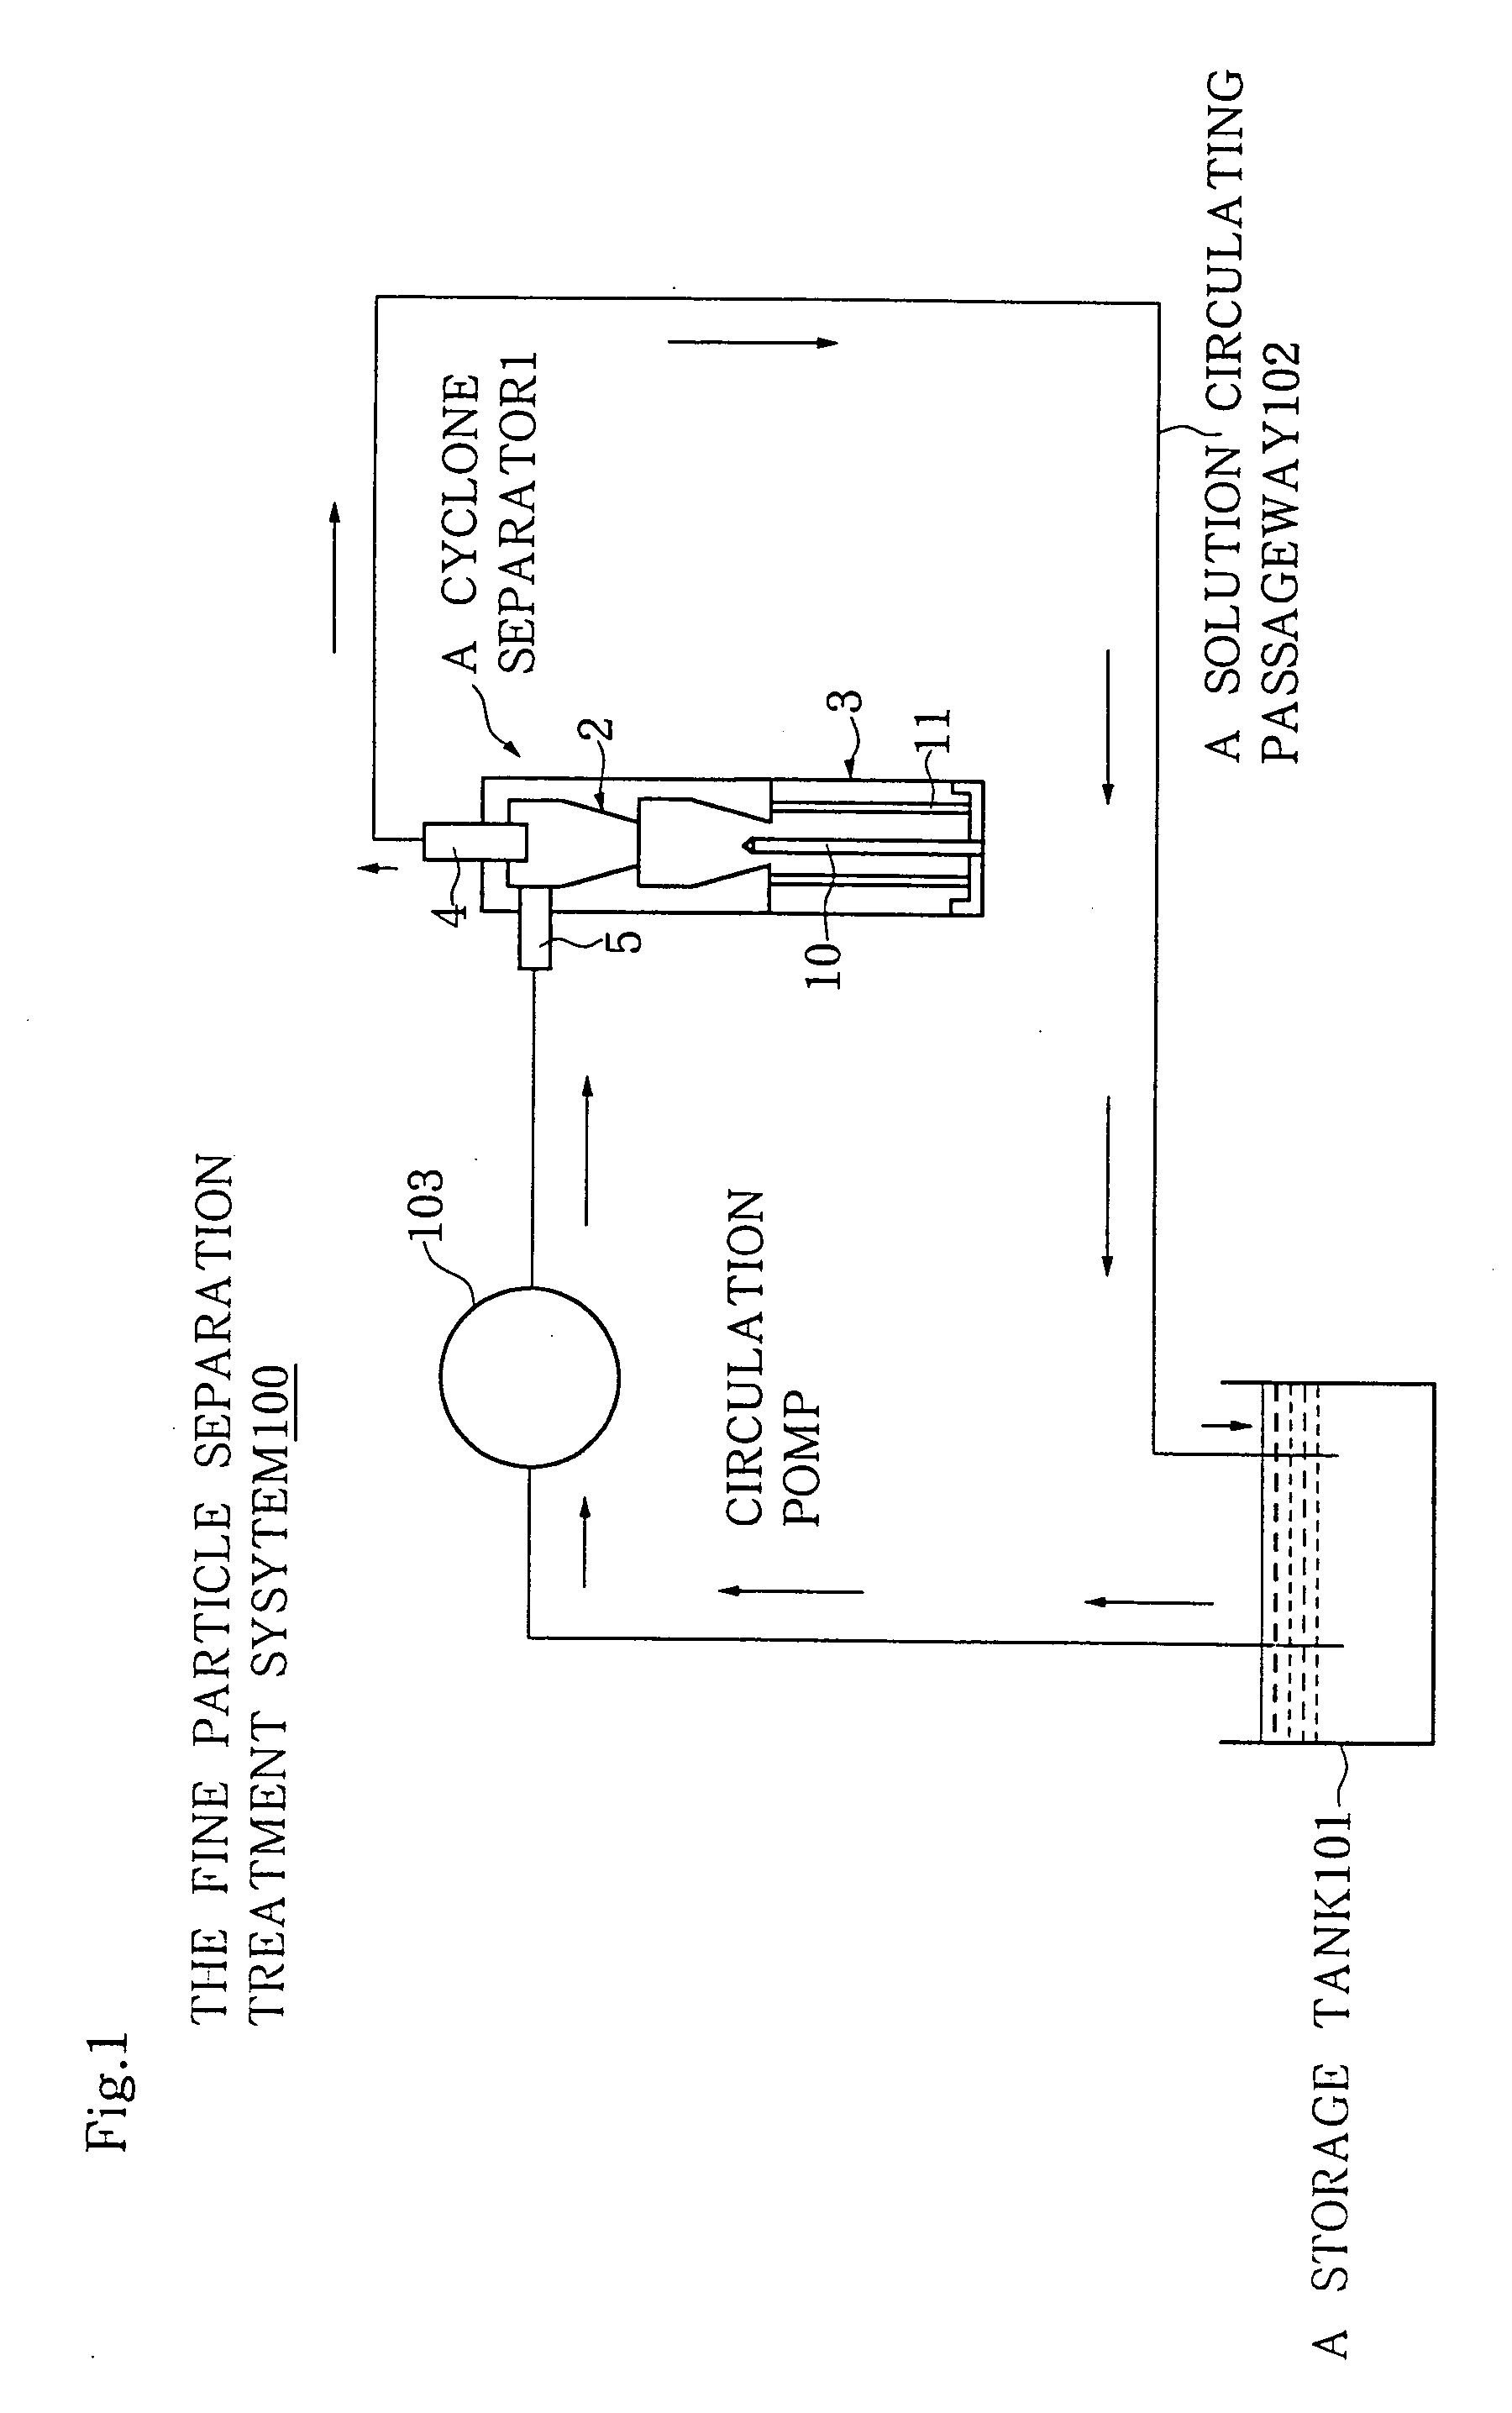 Fine particle separation treatment system and cyclone separator